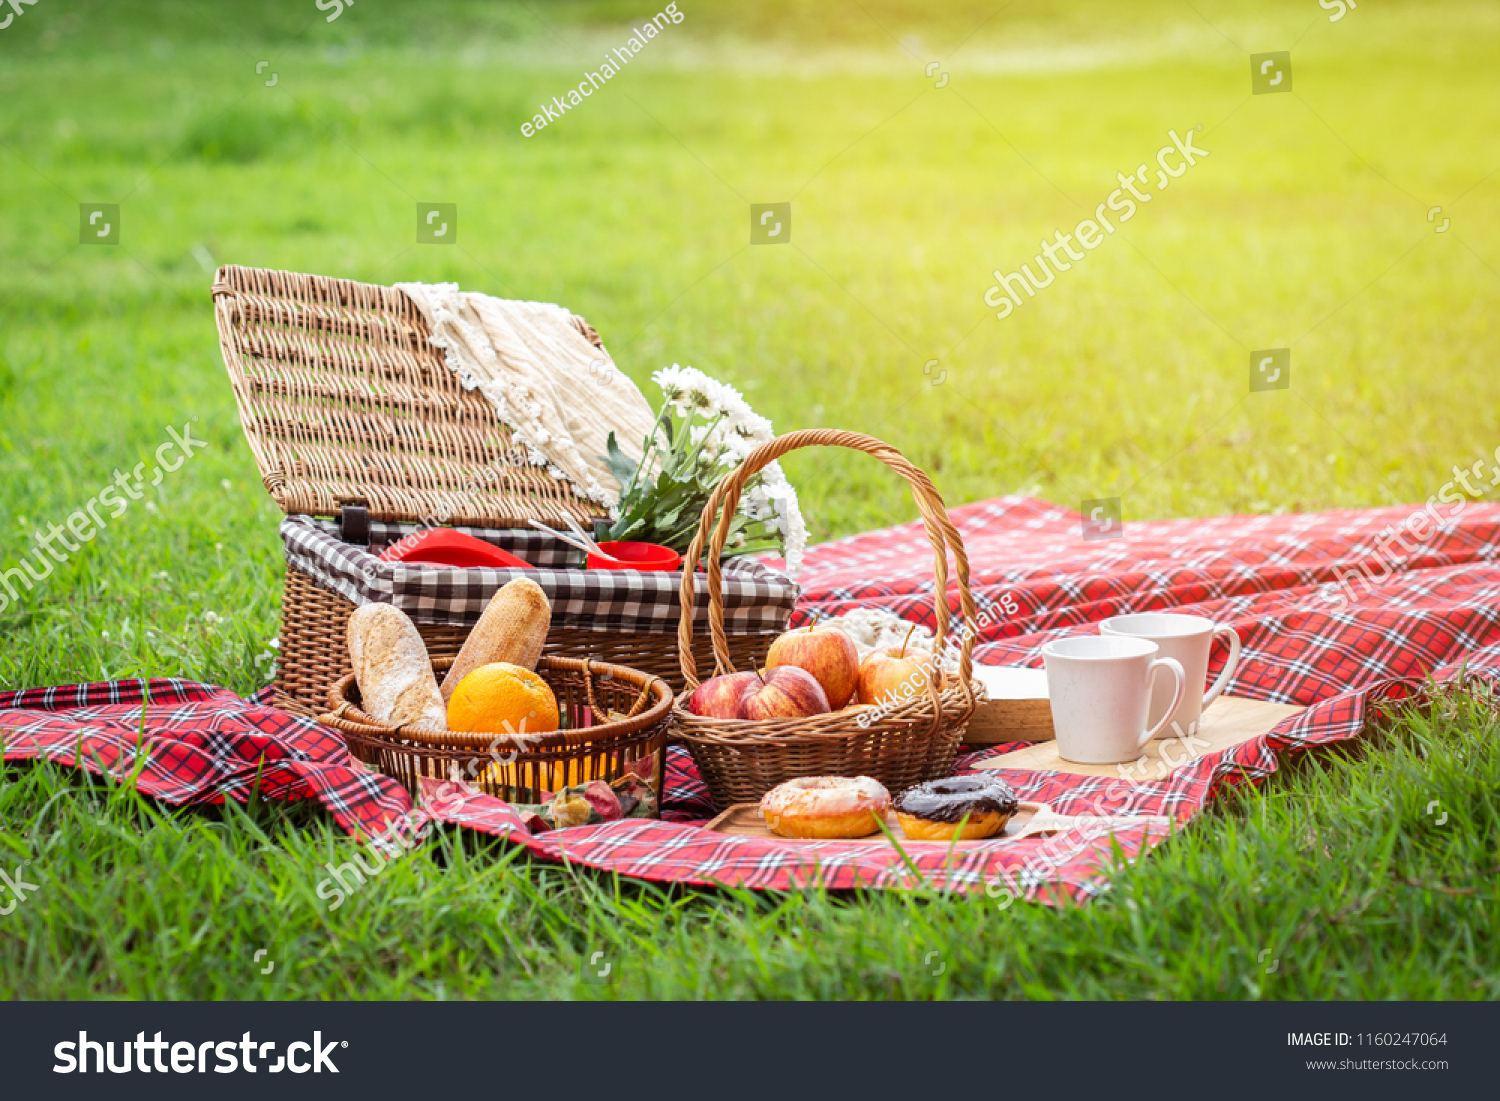 Picnic basket with fruit and bakery on red cloth in garden. #1160247064